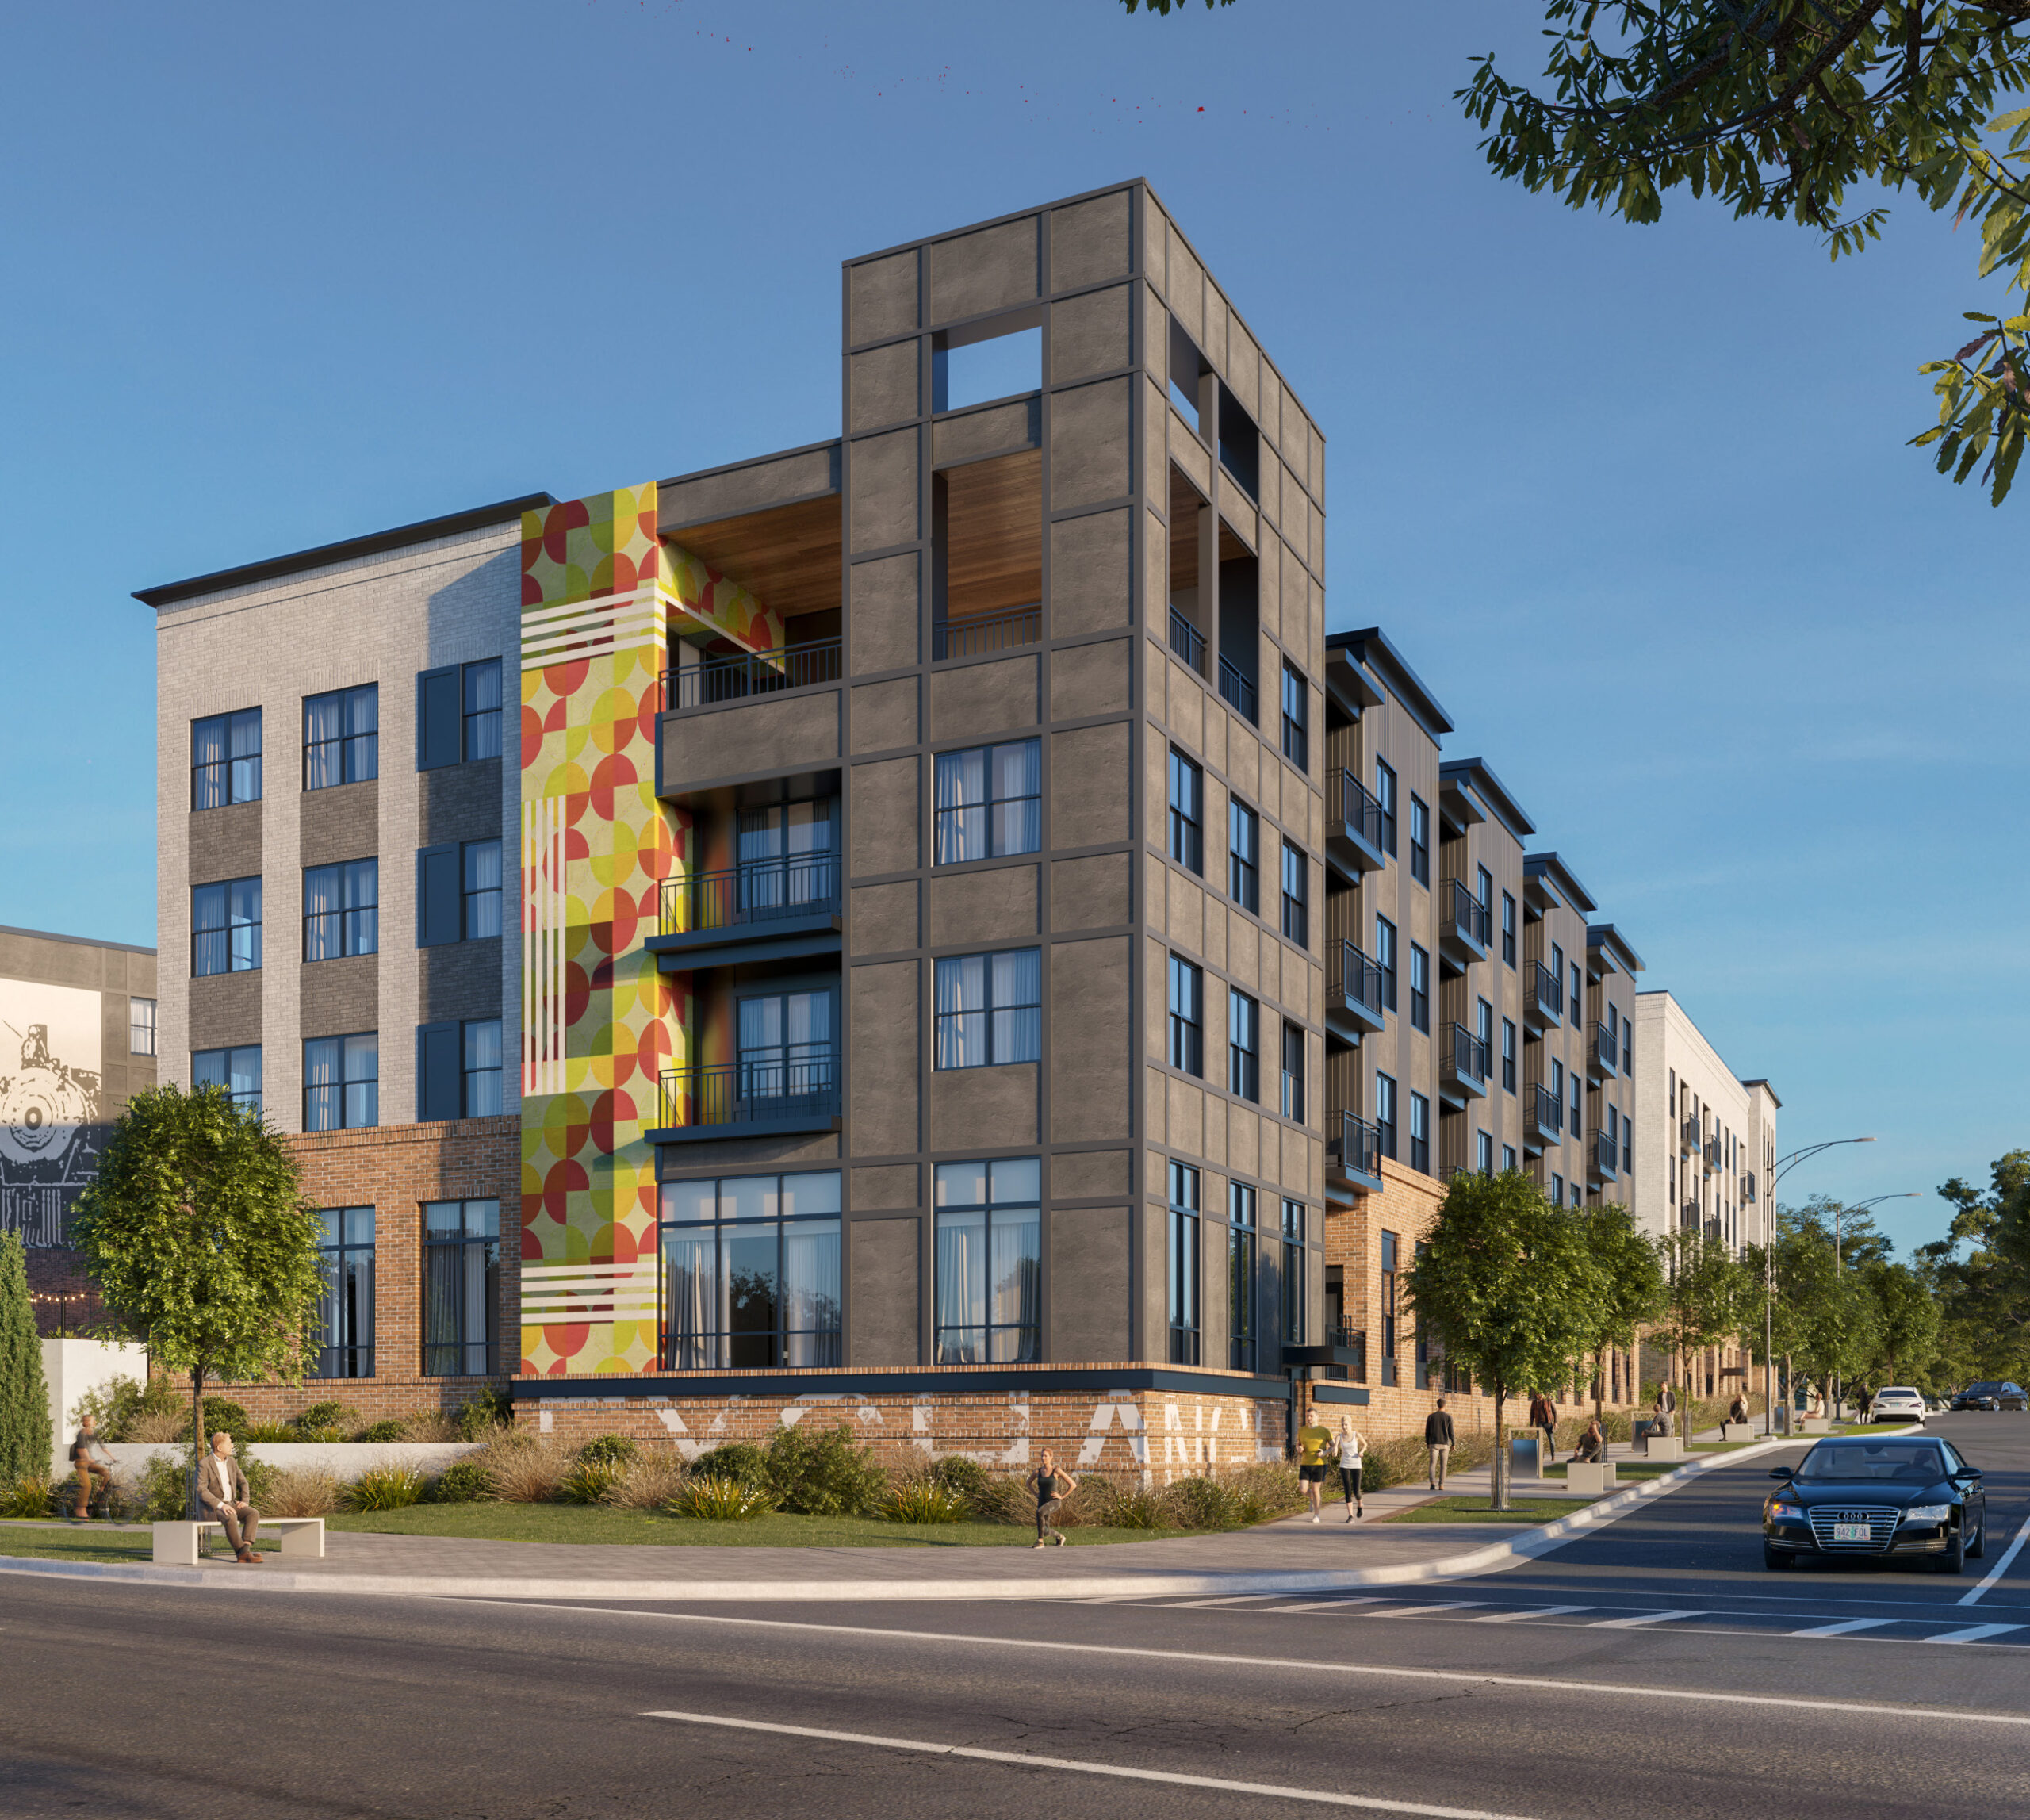 The Exchange at Rock Hill: An Opportunity Zone Mixed-Use Development in Downtown Rock Hill